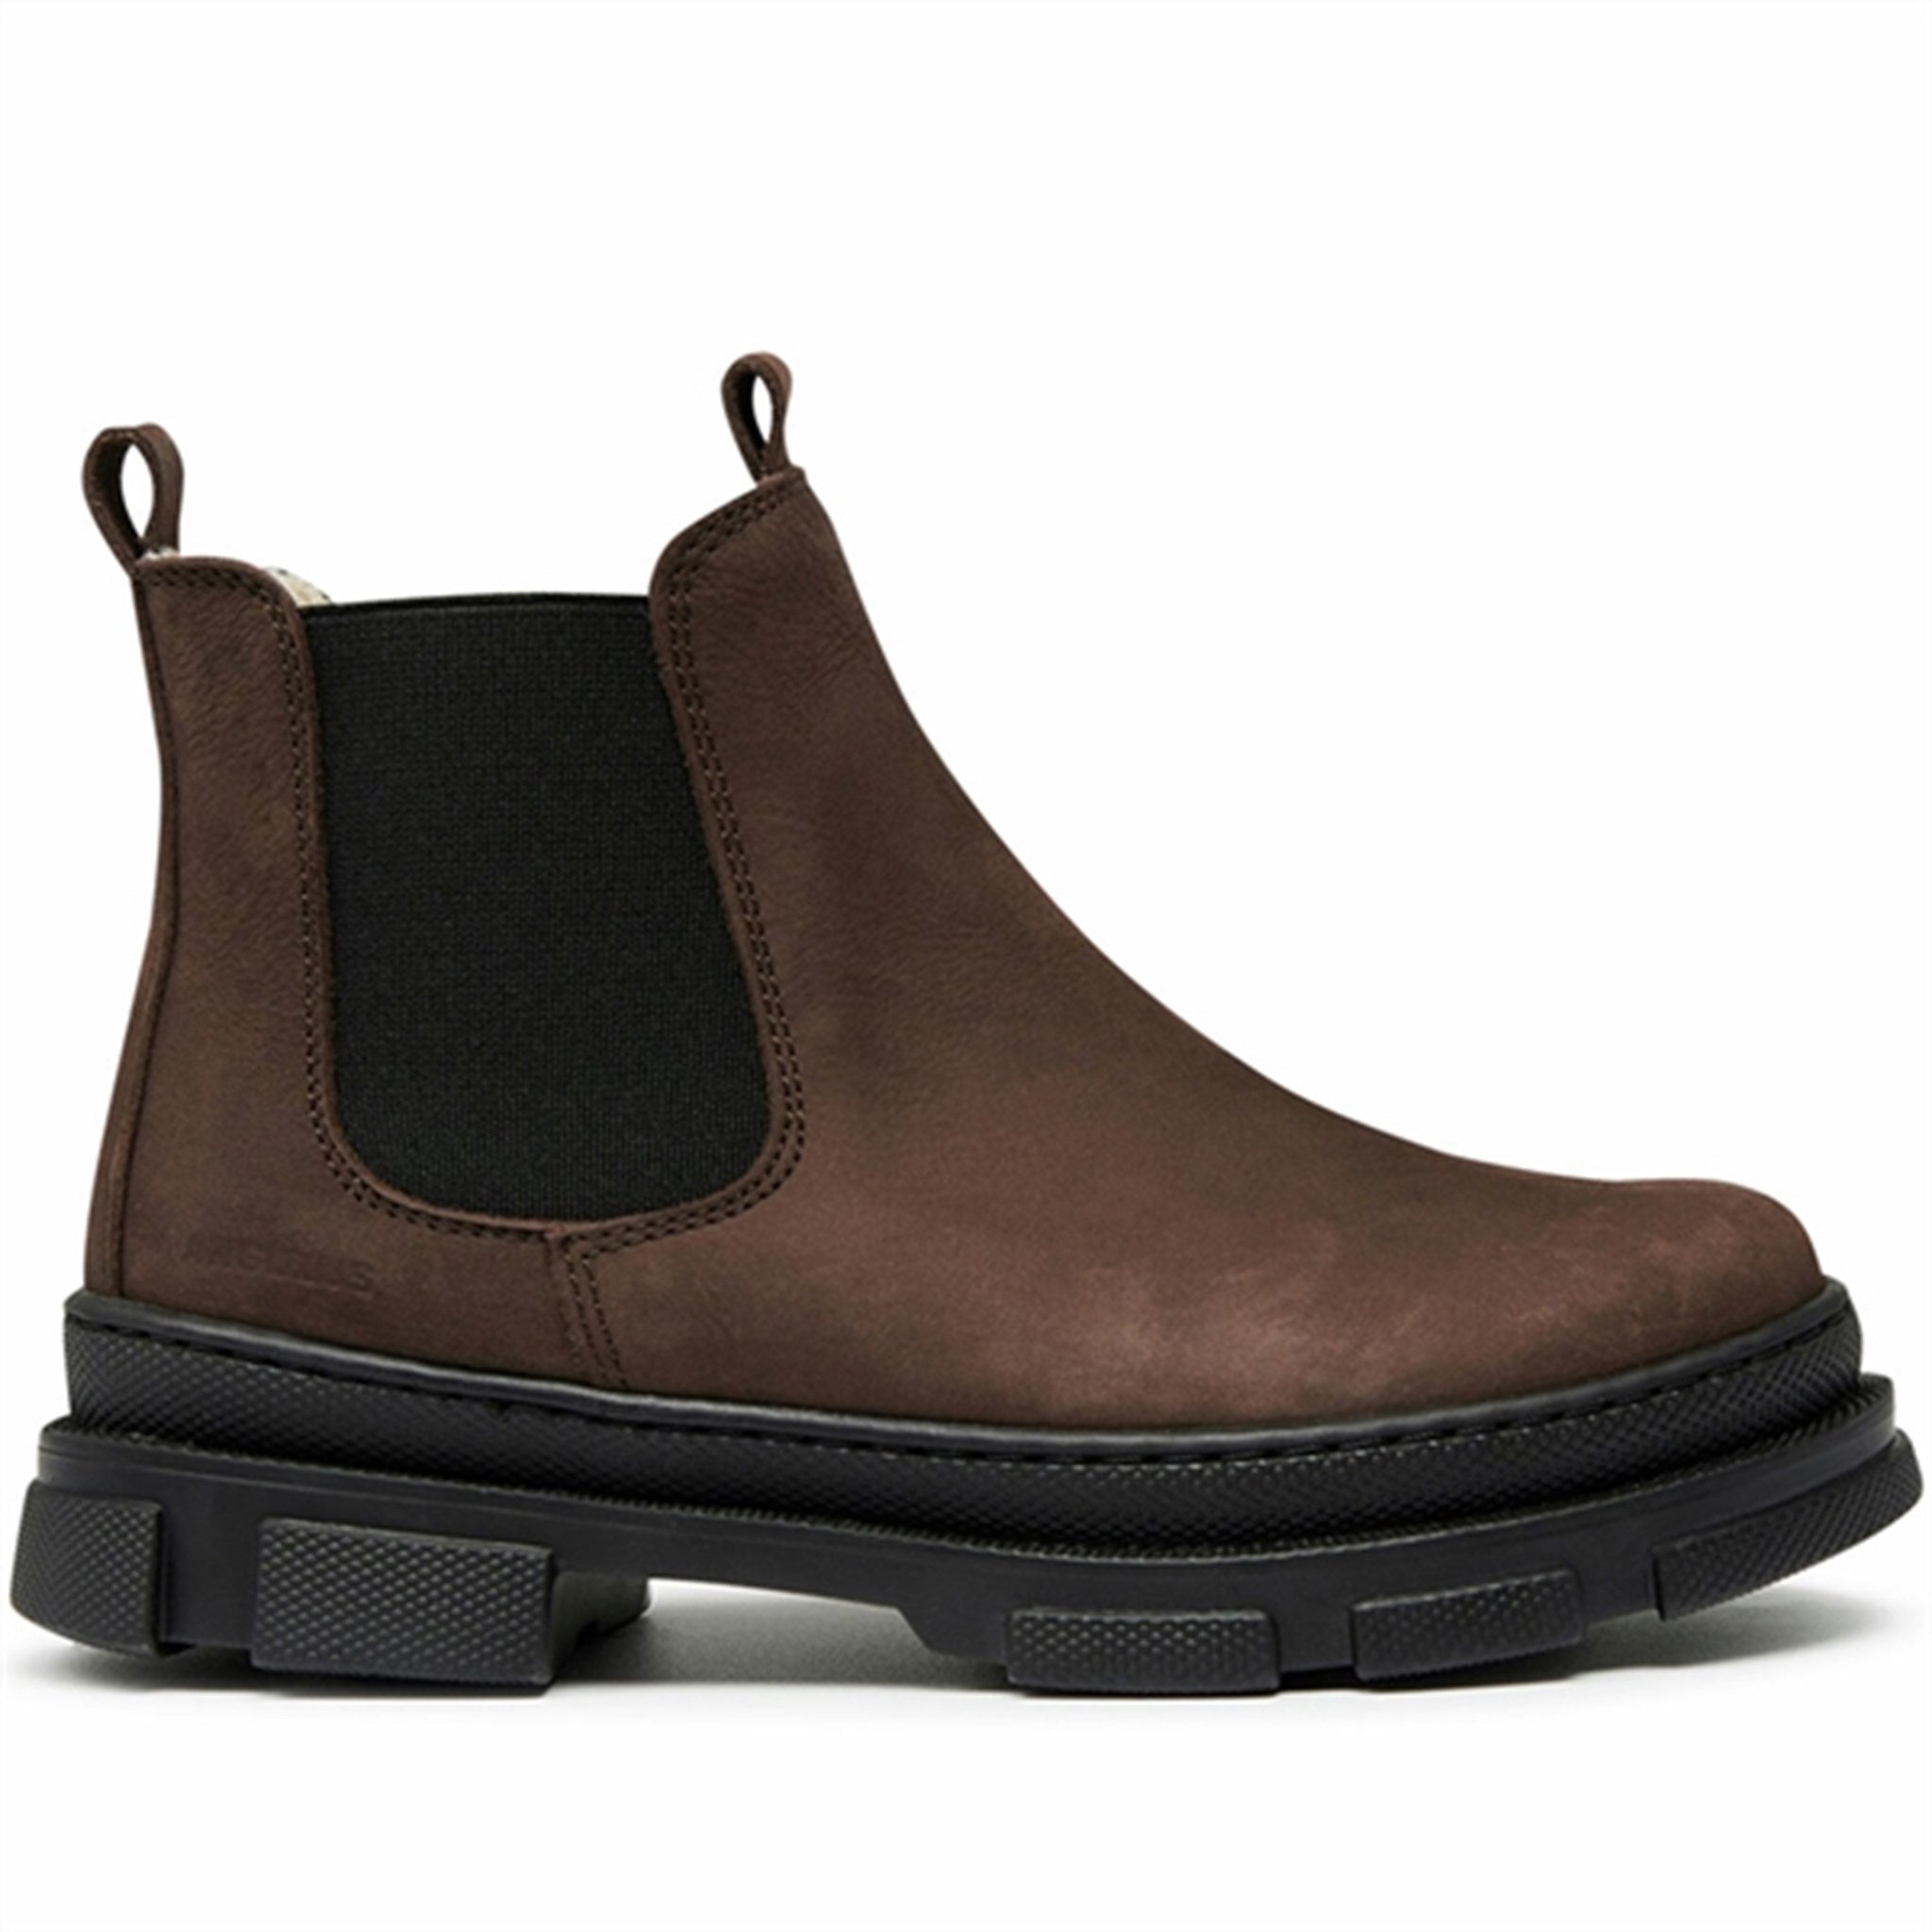 Angulus Chelsea Boots w Elastic and Wool Lining Brown/Black 3